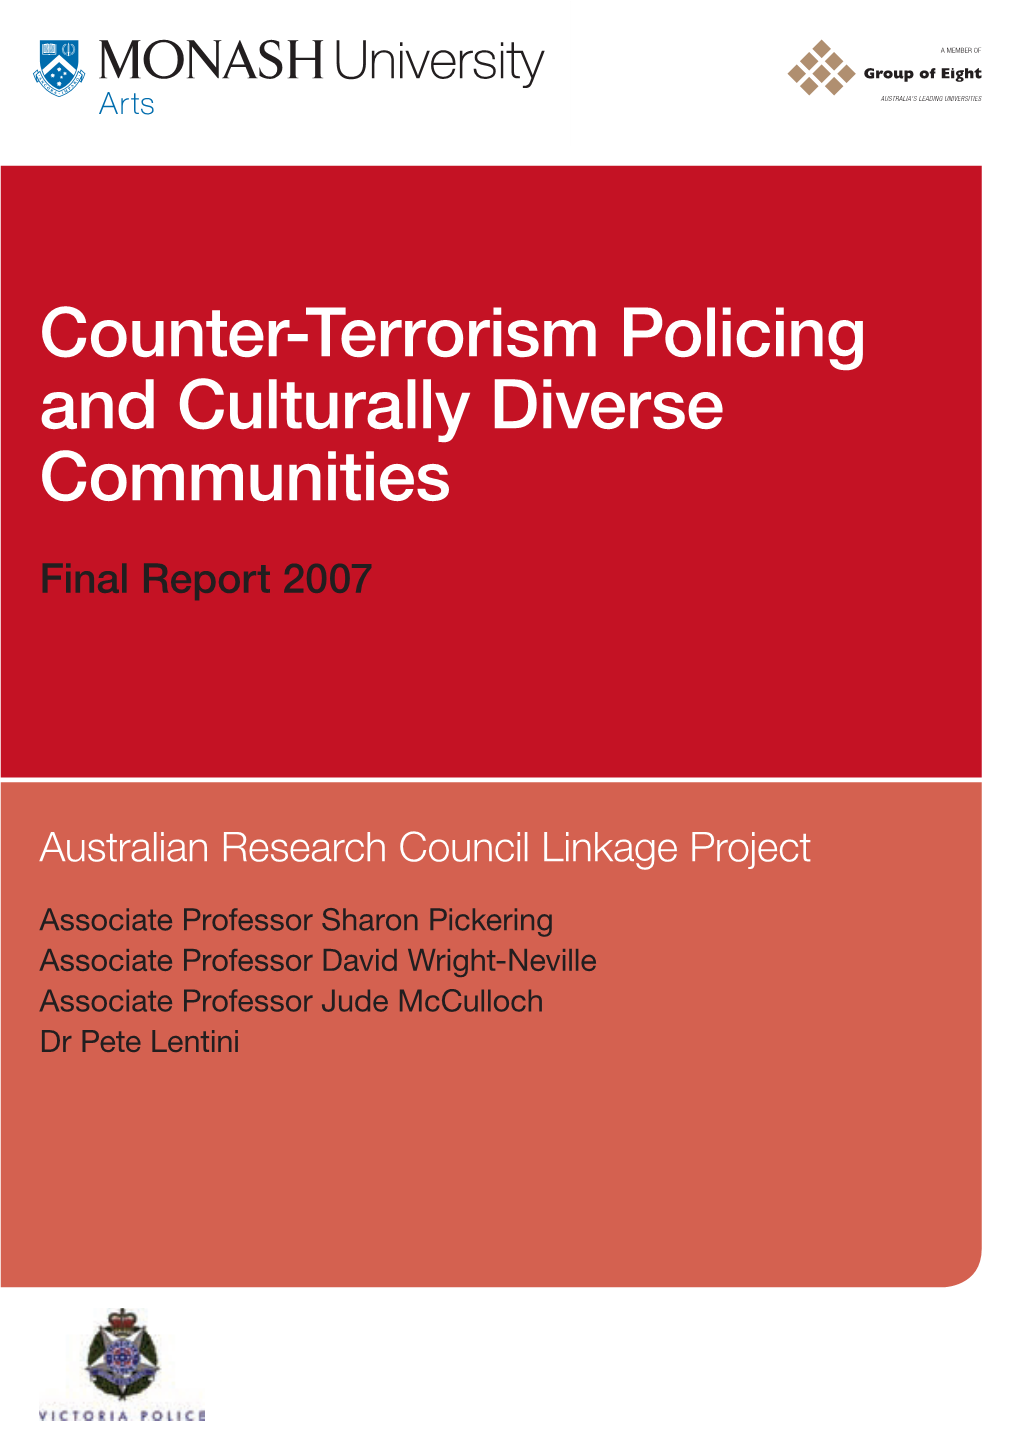 Counter-Terrorism Policing and Culturally Diverse Communities